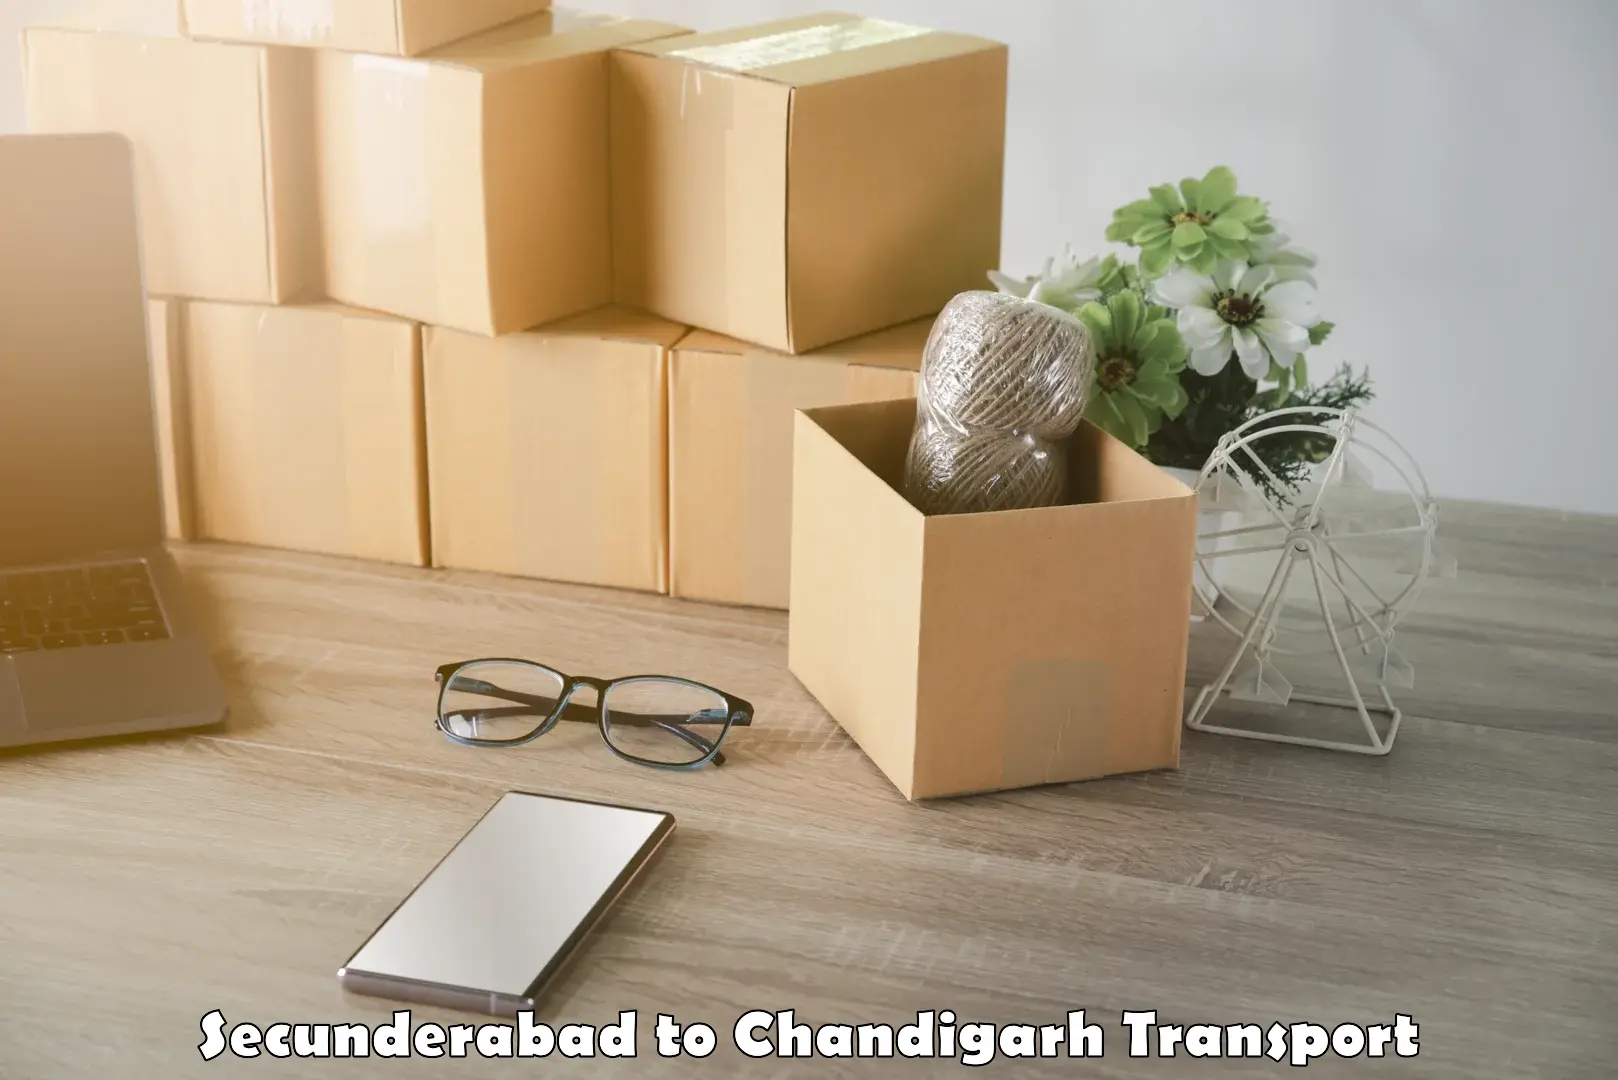 Nearby transport service Secunderabad to Chandigarh